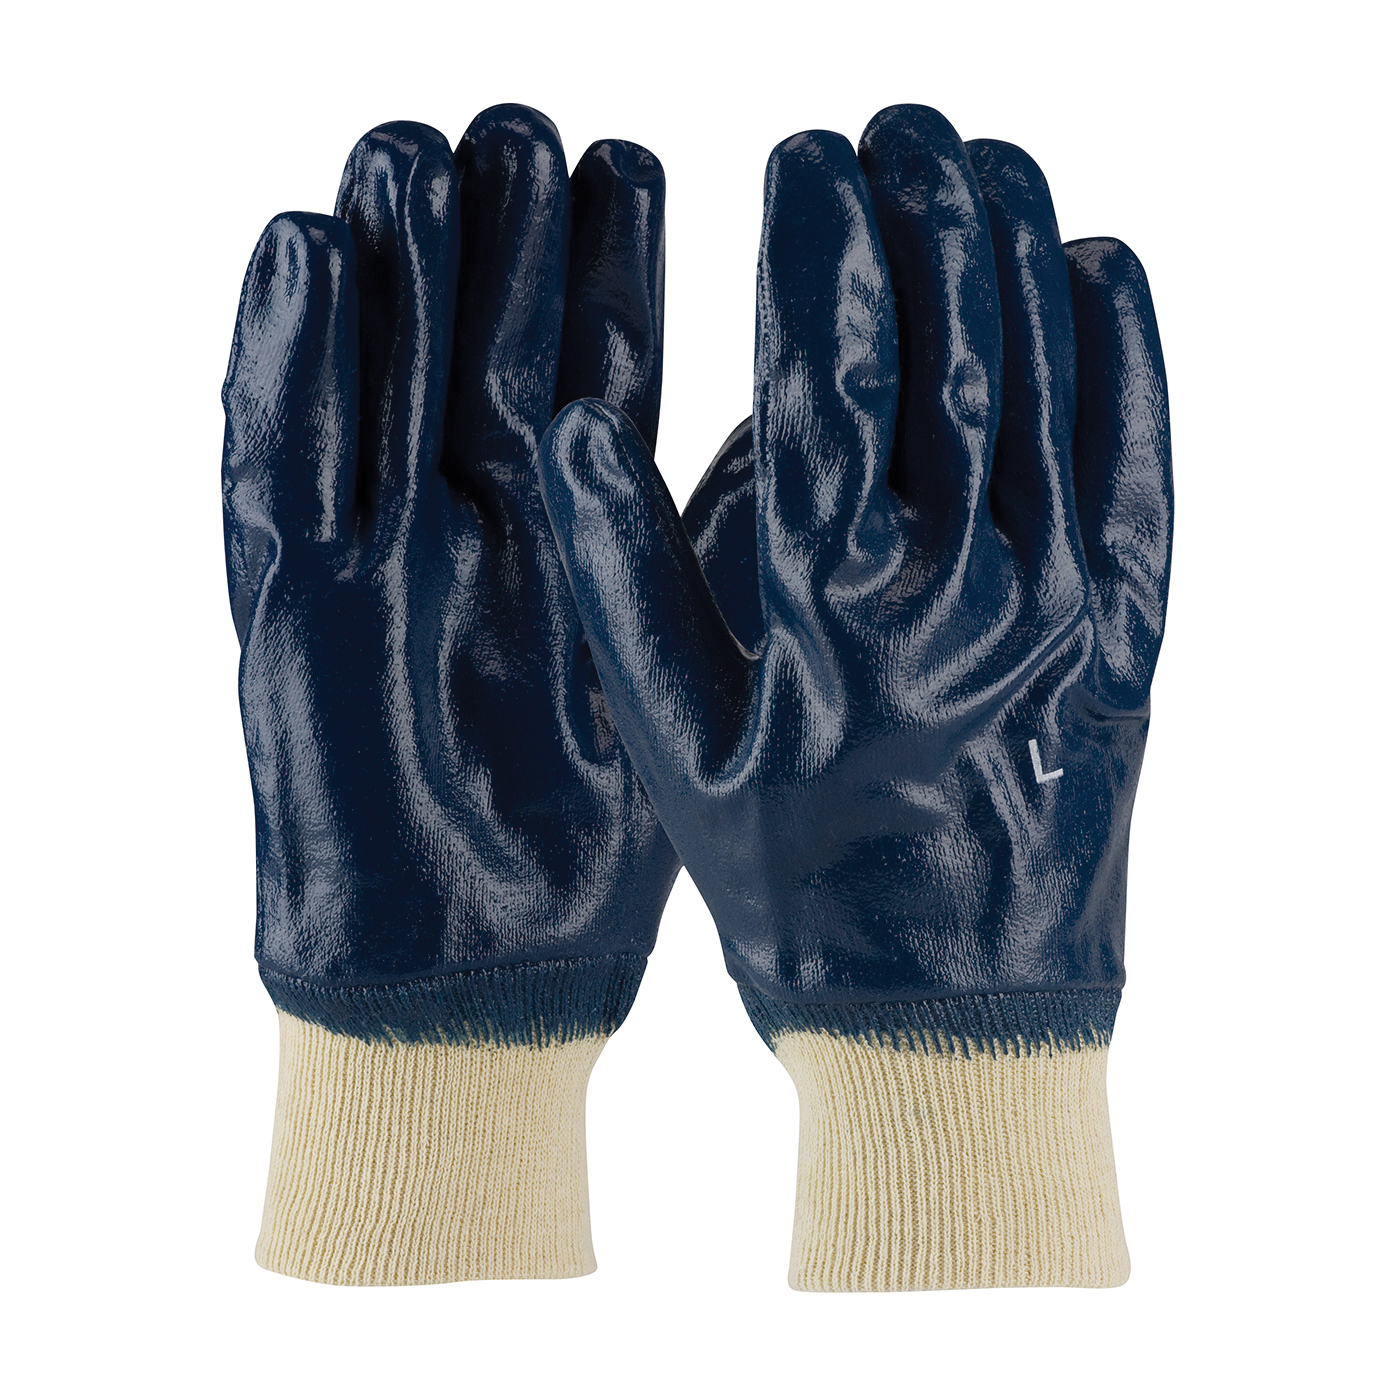 PIP® ArmorTuff® 56-3152/L Dipped Fully Coated Gloves, L, Nitrile, Blue, Cotton Jersey Lining, 10.6 in L, Resists: Abrasion, Chemical, Grease and Oil, Supported Support, Knit Wrist Cuff, 0.7 mm THK